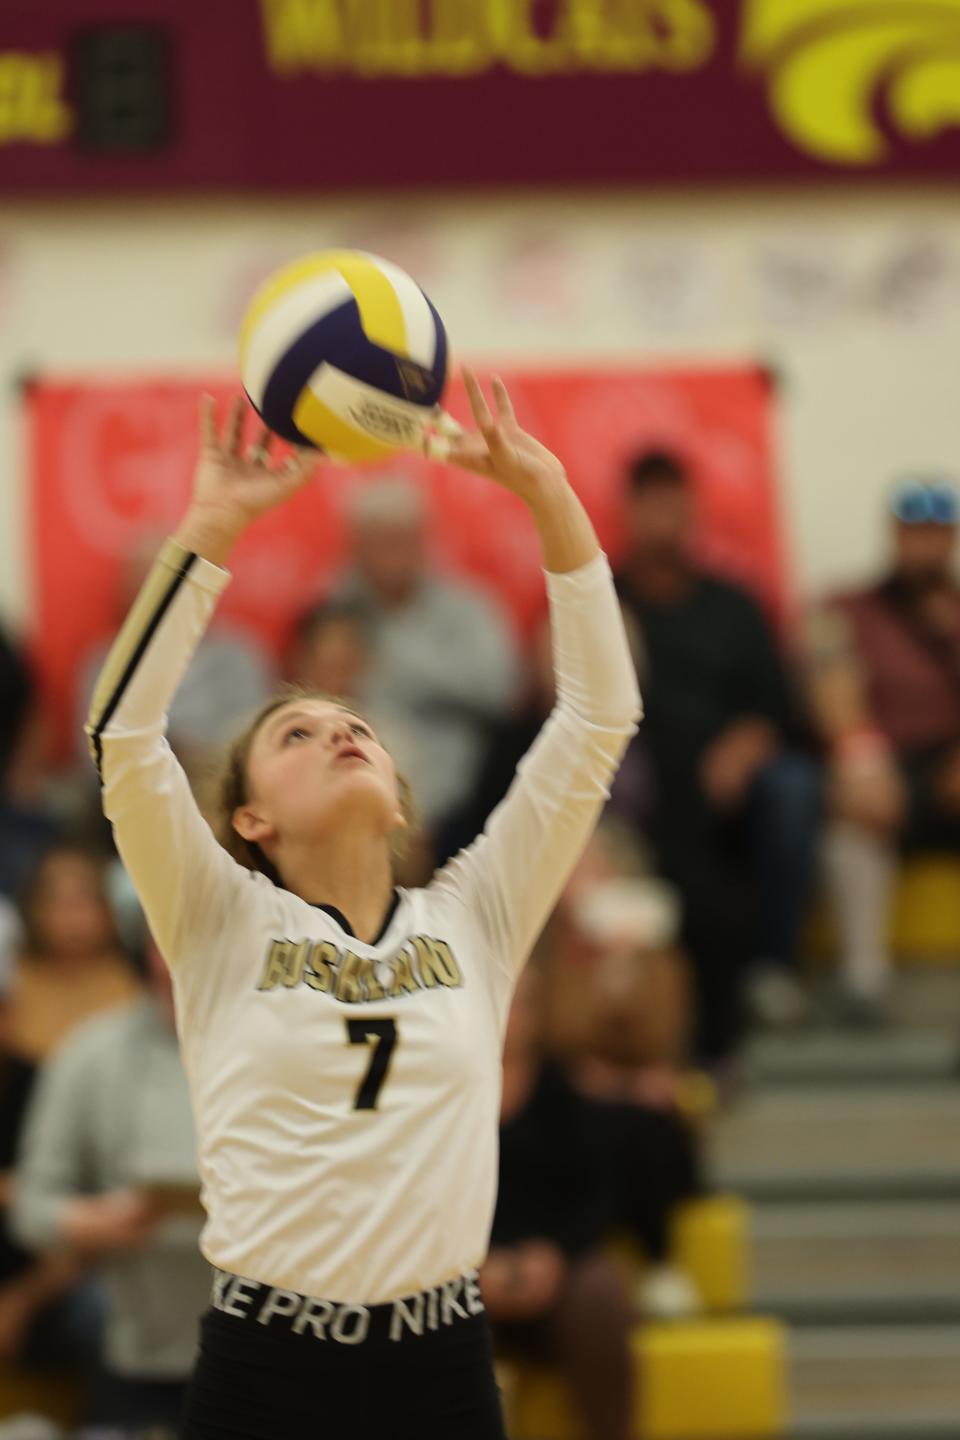 Bushland’s Logan Culpepper (7) attempts to set the ball during a District 1-3A match against River Road on Tuesday, Oct. 25, 2022 at River Road High School.